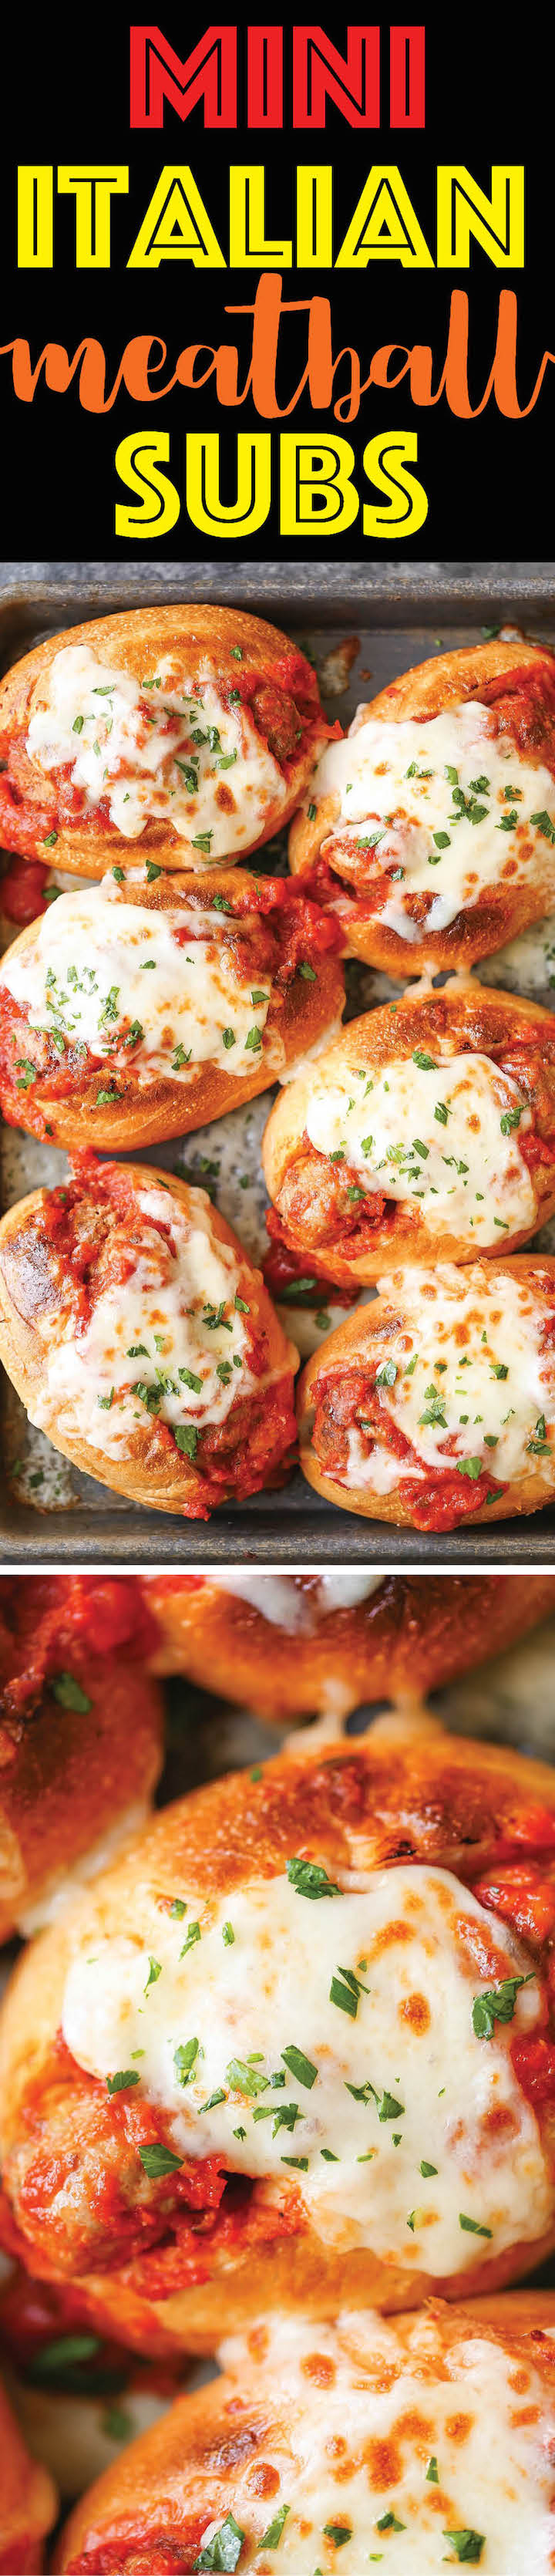 Mini Italian Meatball Subs - Tender, melt-in-your-mouth (make-ahead!) meatballs stuffed into mini subs. Makes for easy serving, sharing and portion control!